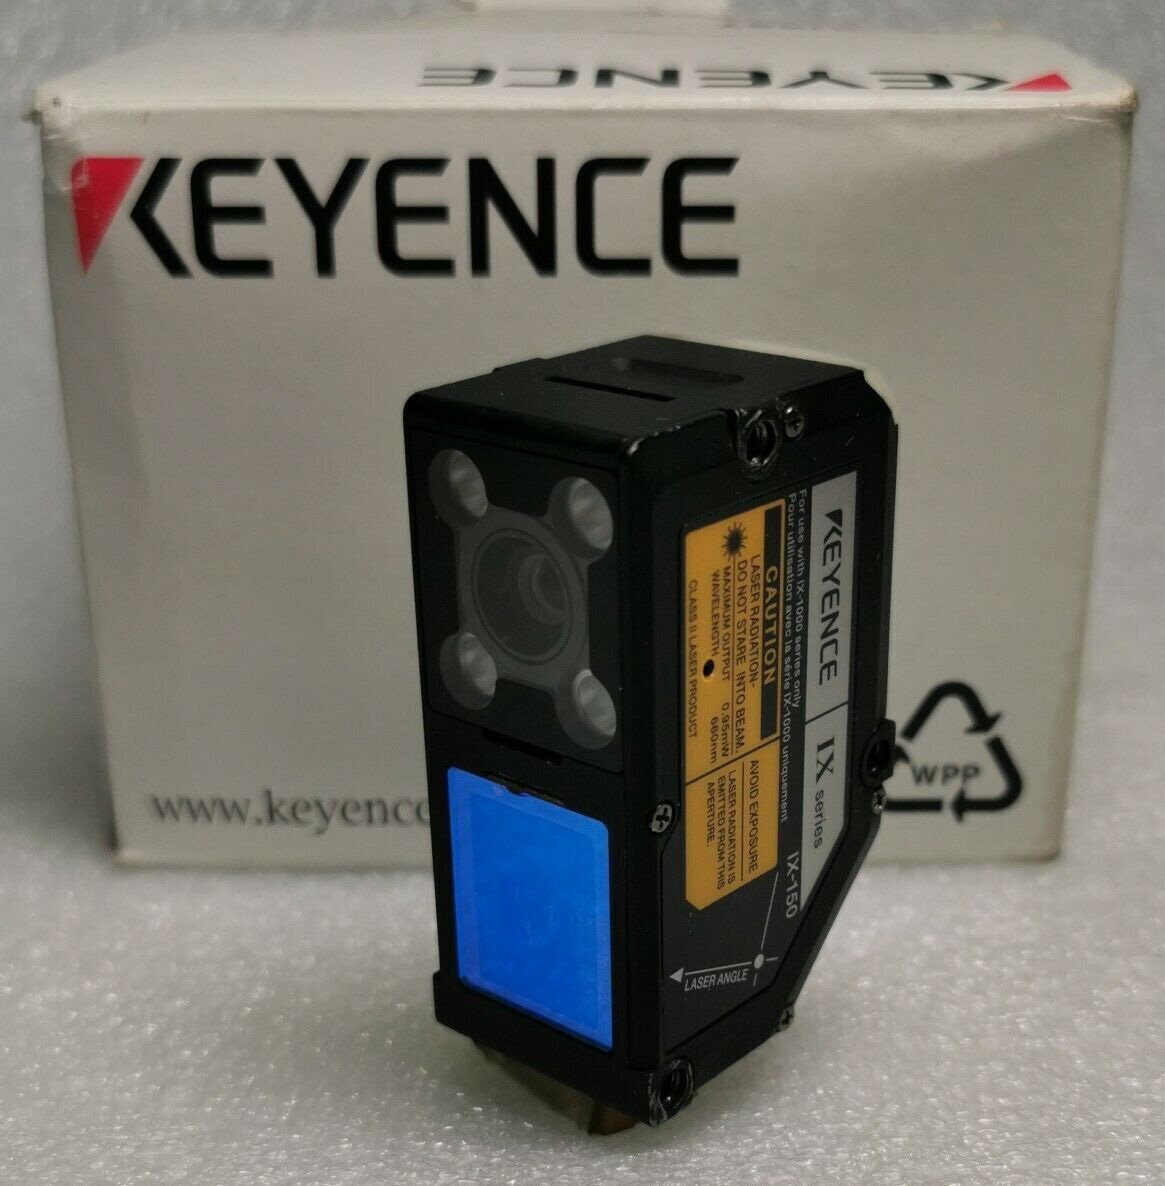 KEYENCE IX-150 Parts Used for sale price #9355732, 2019 > buy from CAE